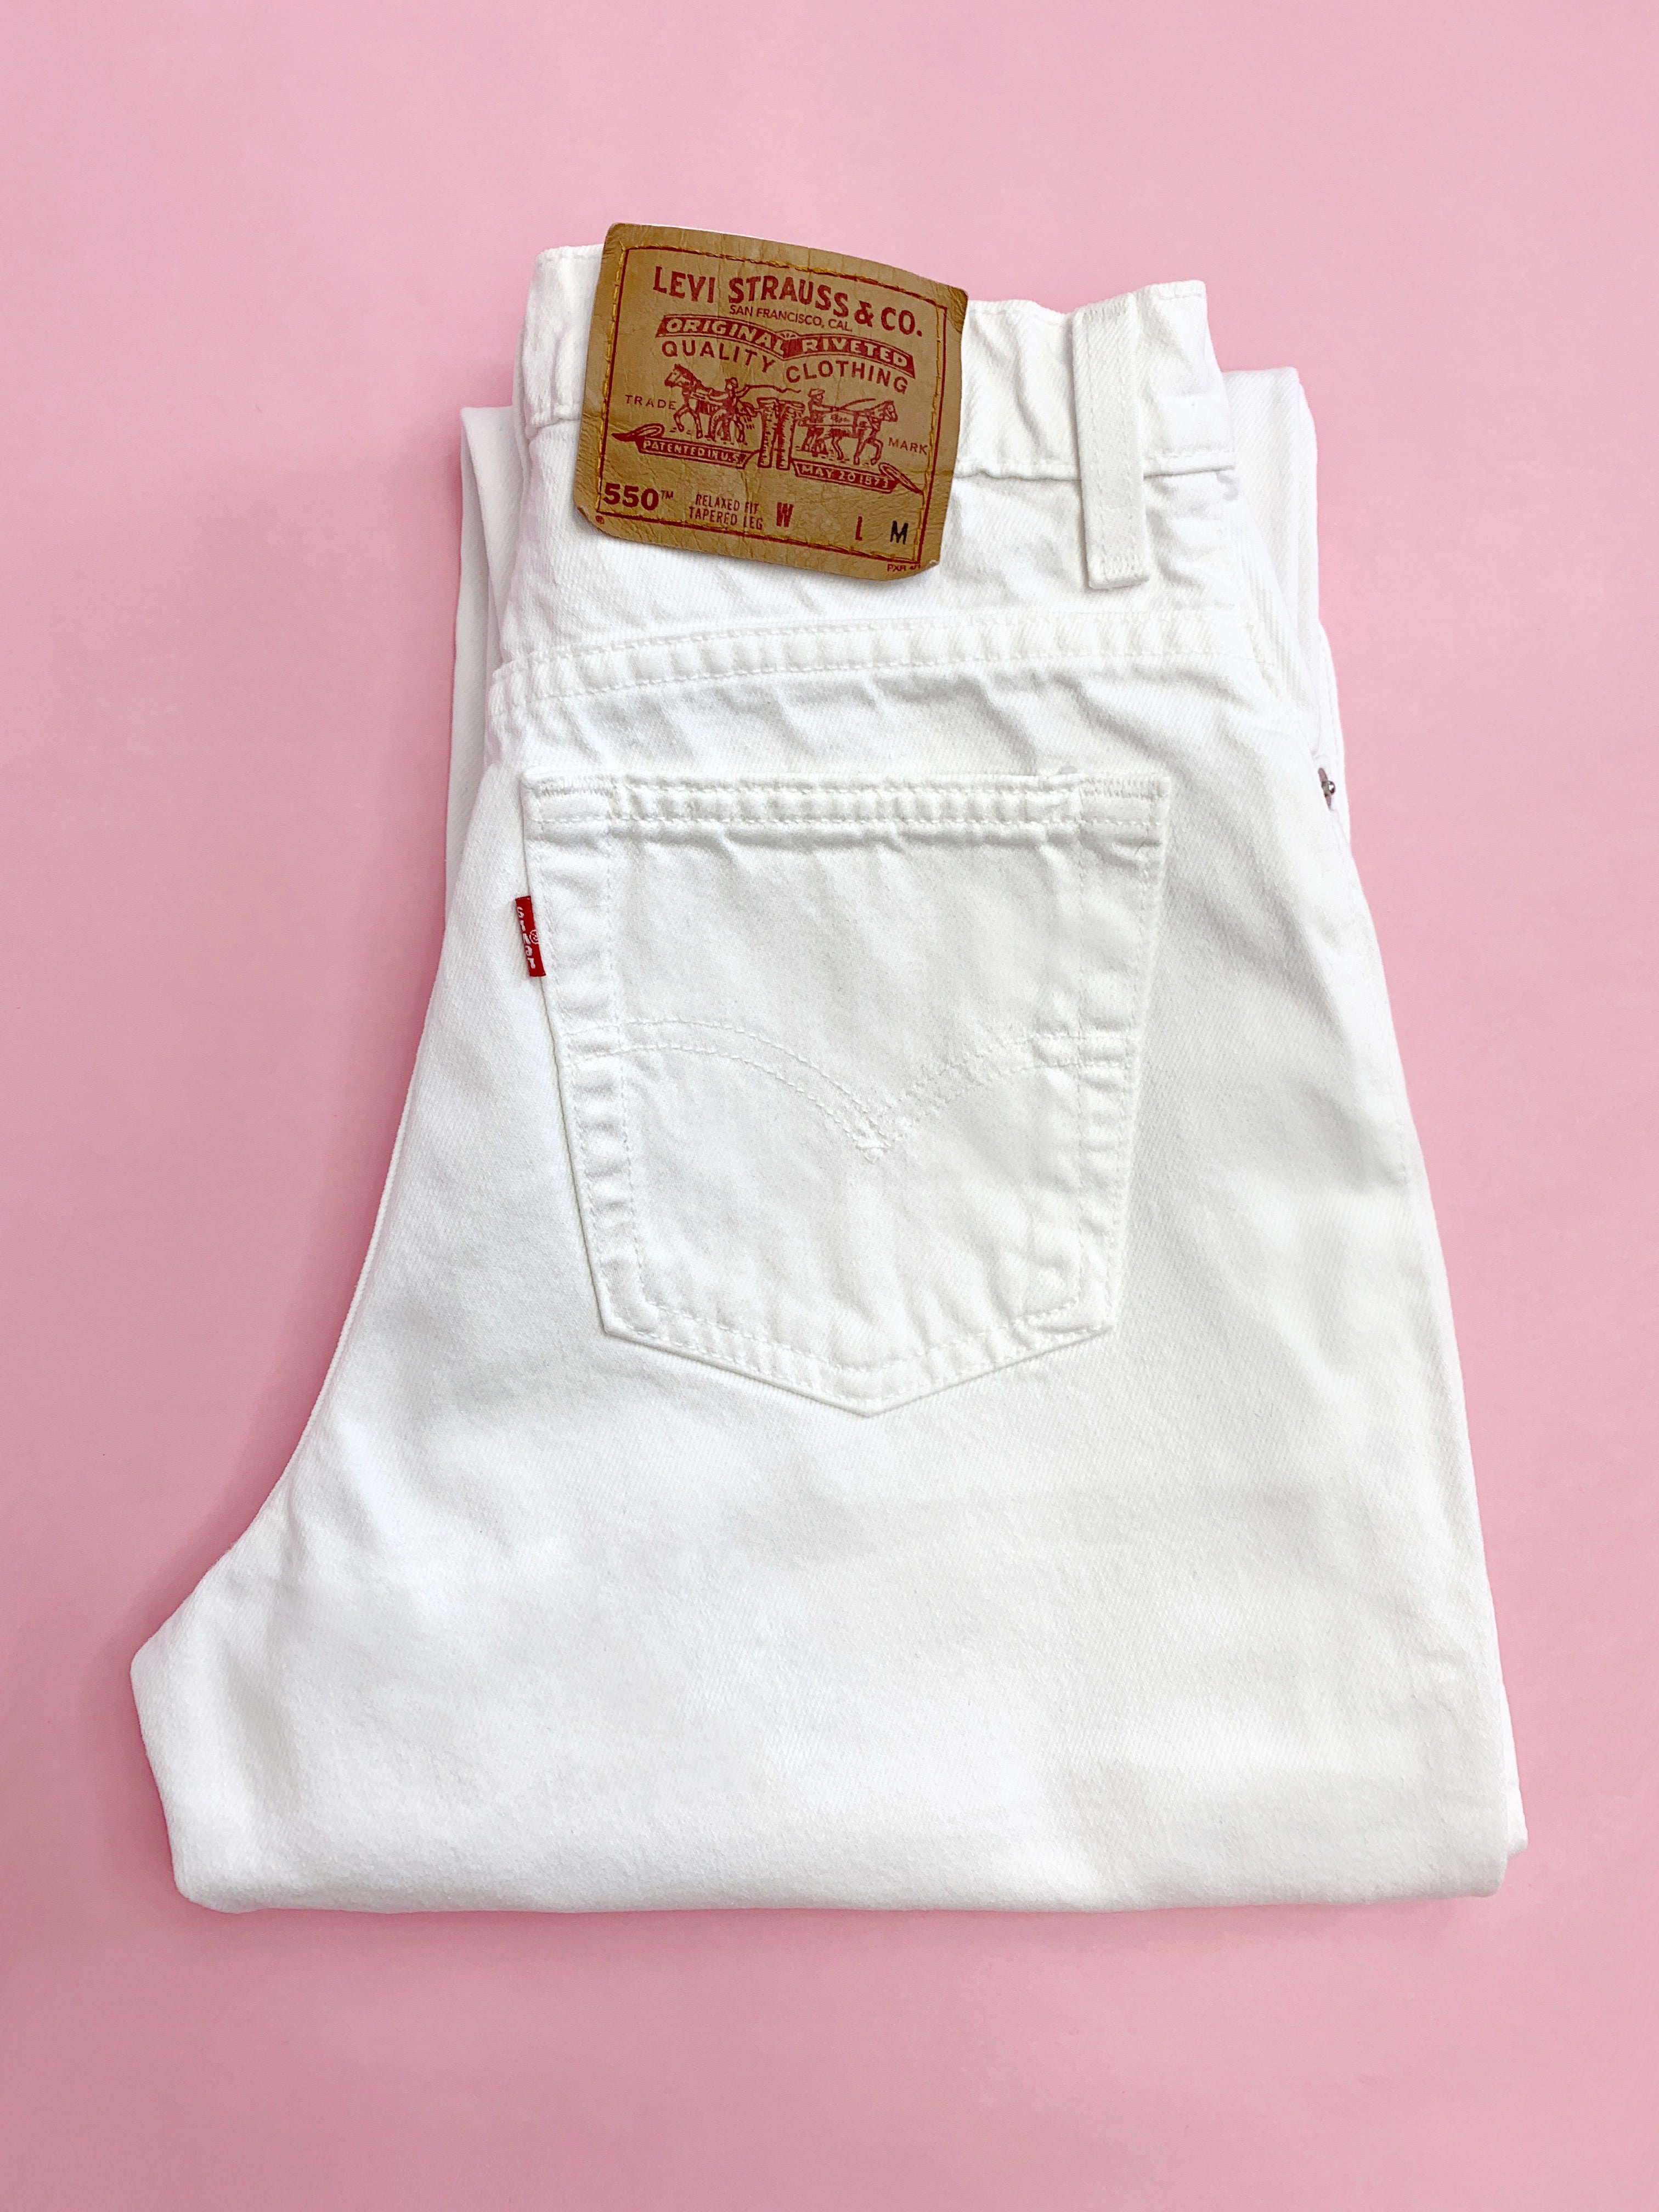 All Sizes White Vintage High Waisted Tapered Levis Jeans